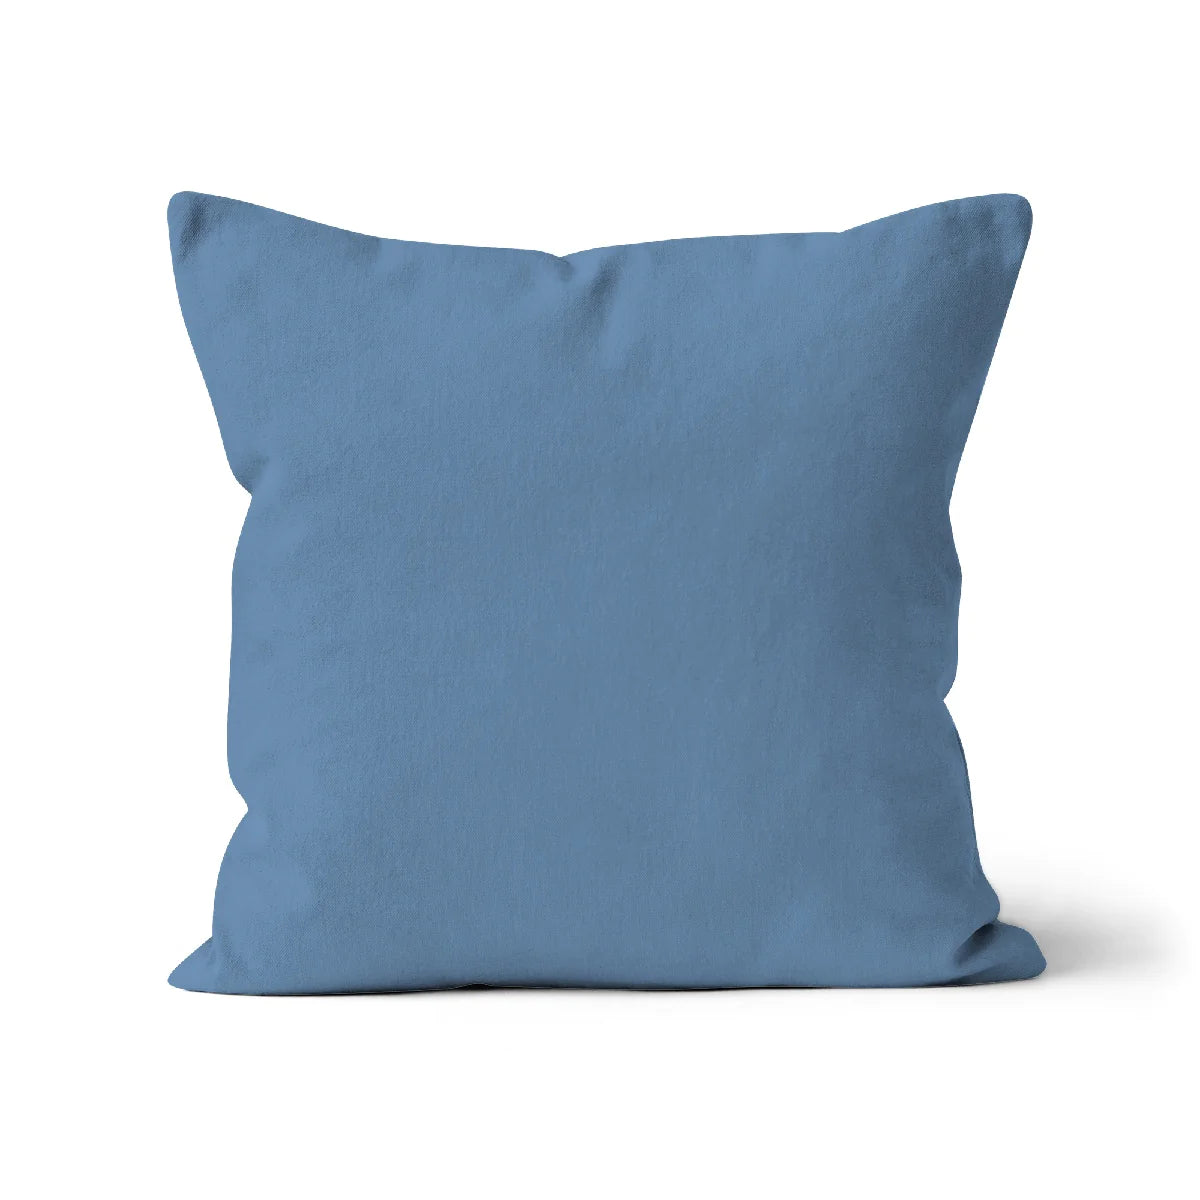 Sustainable and eco-friendly, this UK-made airforce blue cushion cover is crafted from high-quality organic cotton. The unfilled nautical square-shaped cushion cover is a beautiful grey-blue hue making it a versatile and stylish addition to any interior theme. Machine washable for easy cleaning, this cushion cover is a perfect choice for those seeking plain colour options for their sustainable homeware collection